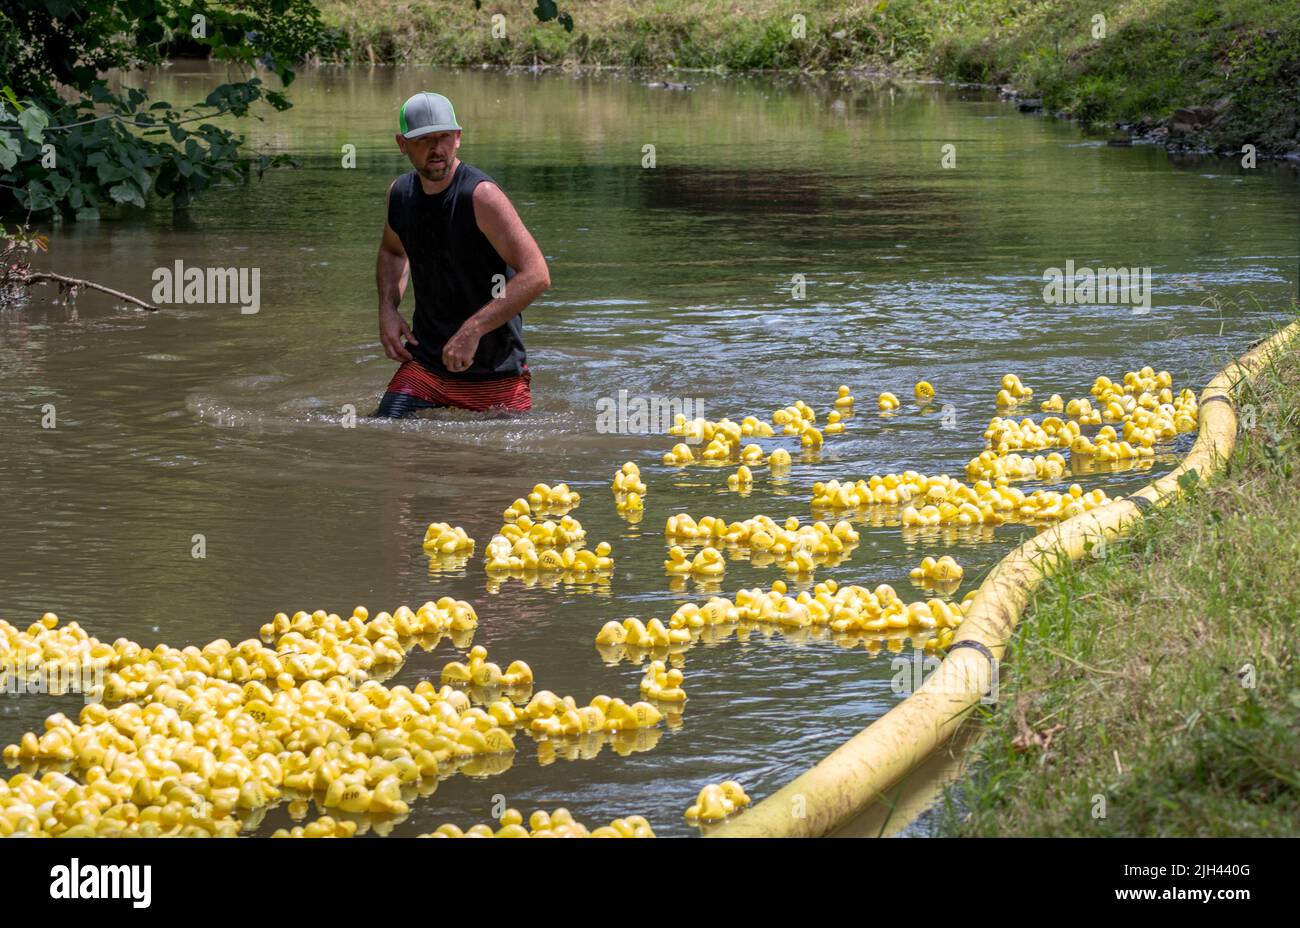 June 30 2019 Watervleit MI USA , a man wades through water on a small Michigan river, during a duck race contest, keeping a watch on hundreds of rubbe Stock Photo